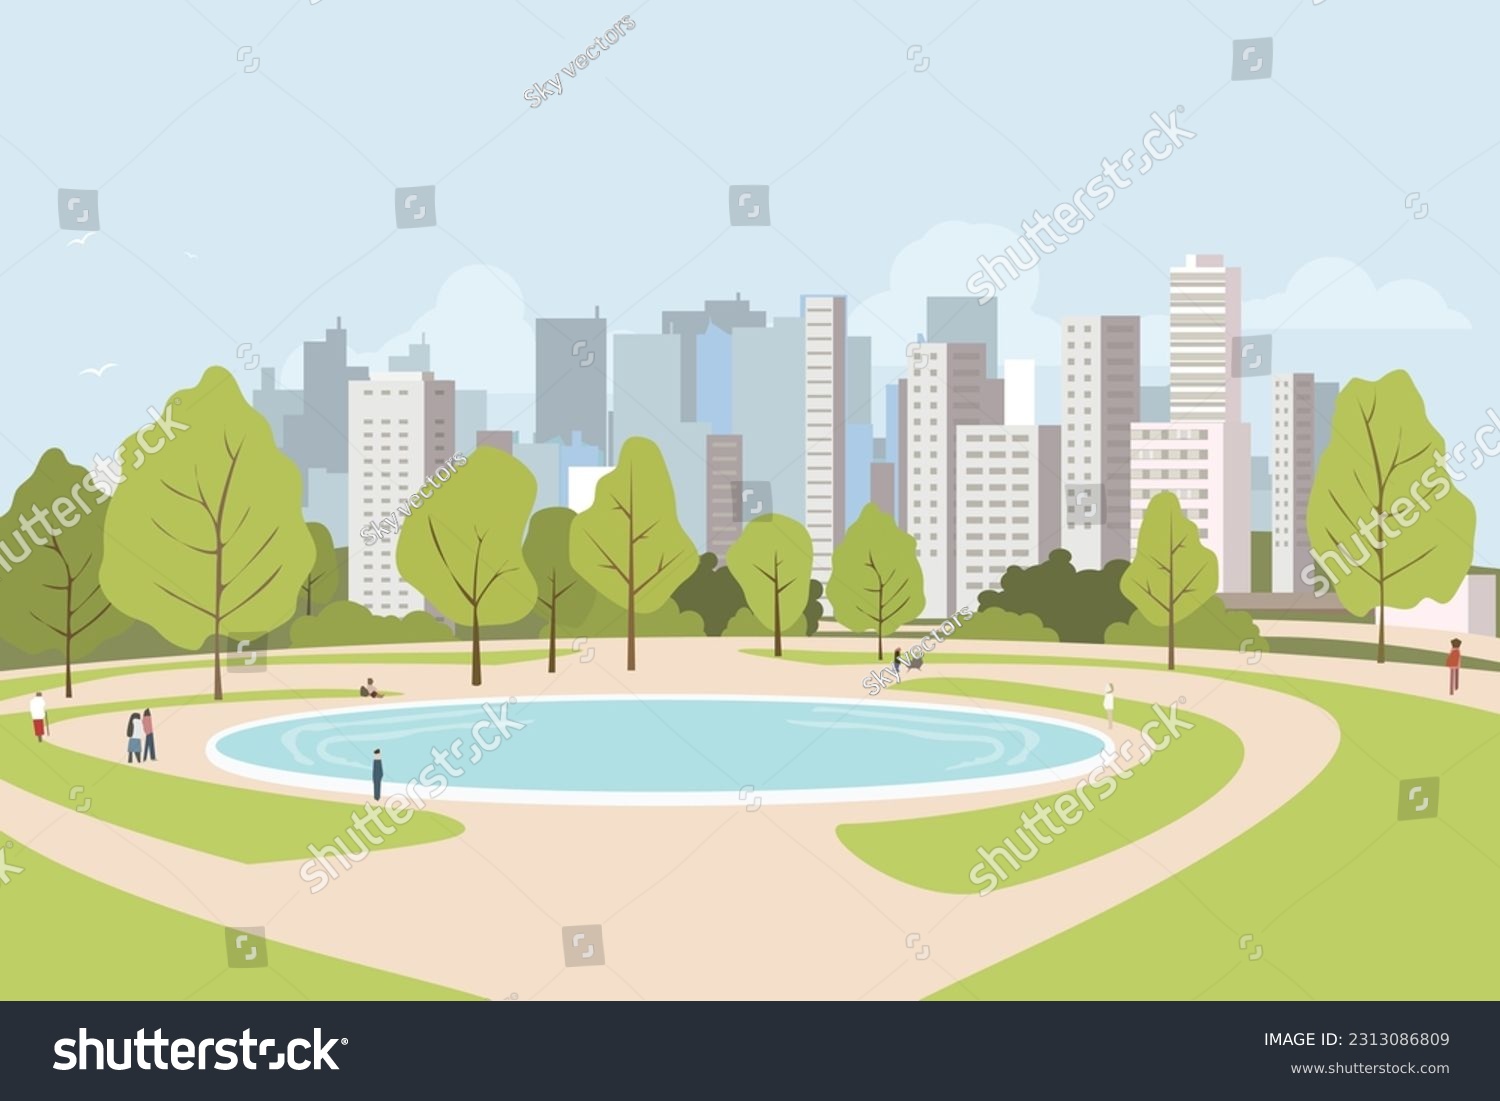 City park lawn and trees, small pond or fountain and abstract people figure. Flat style vector. On background business city center with skyscrapers. Green park vegetation in center of big town. #2313086809